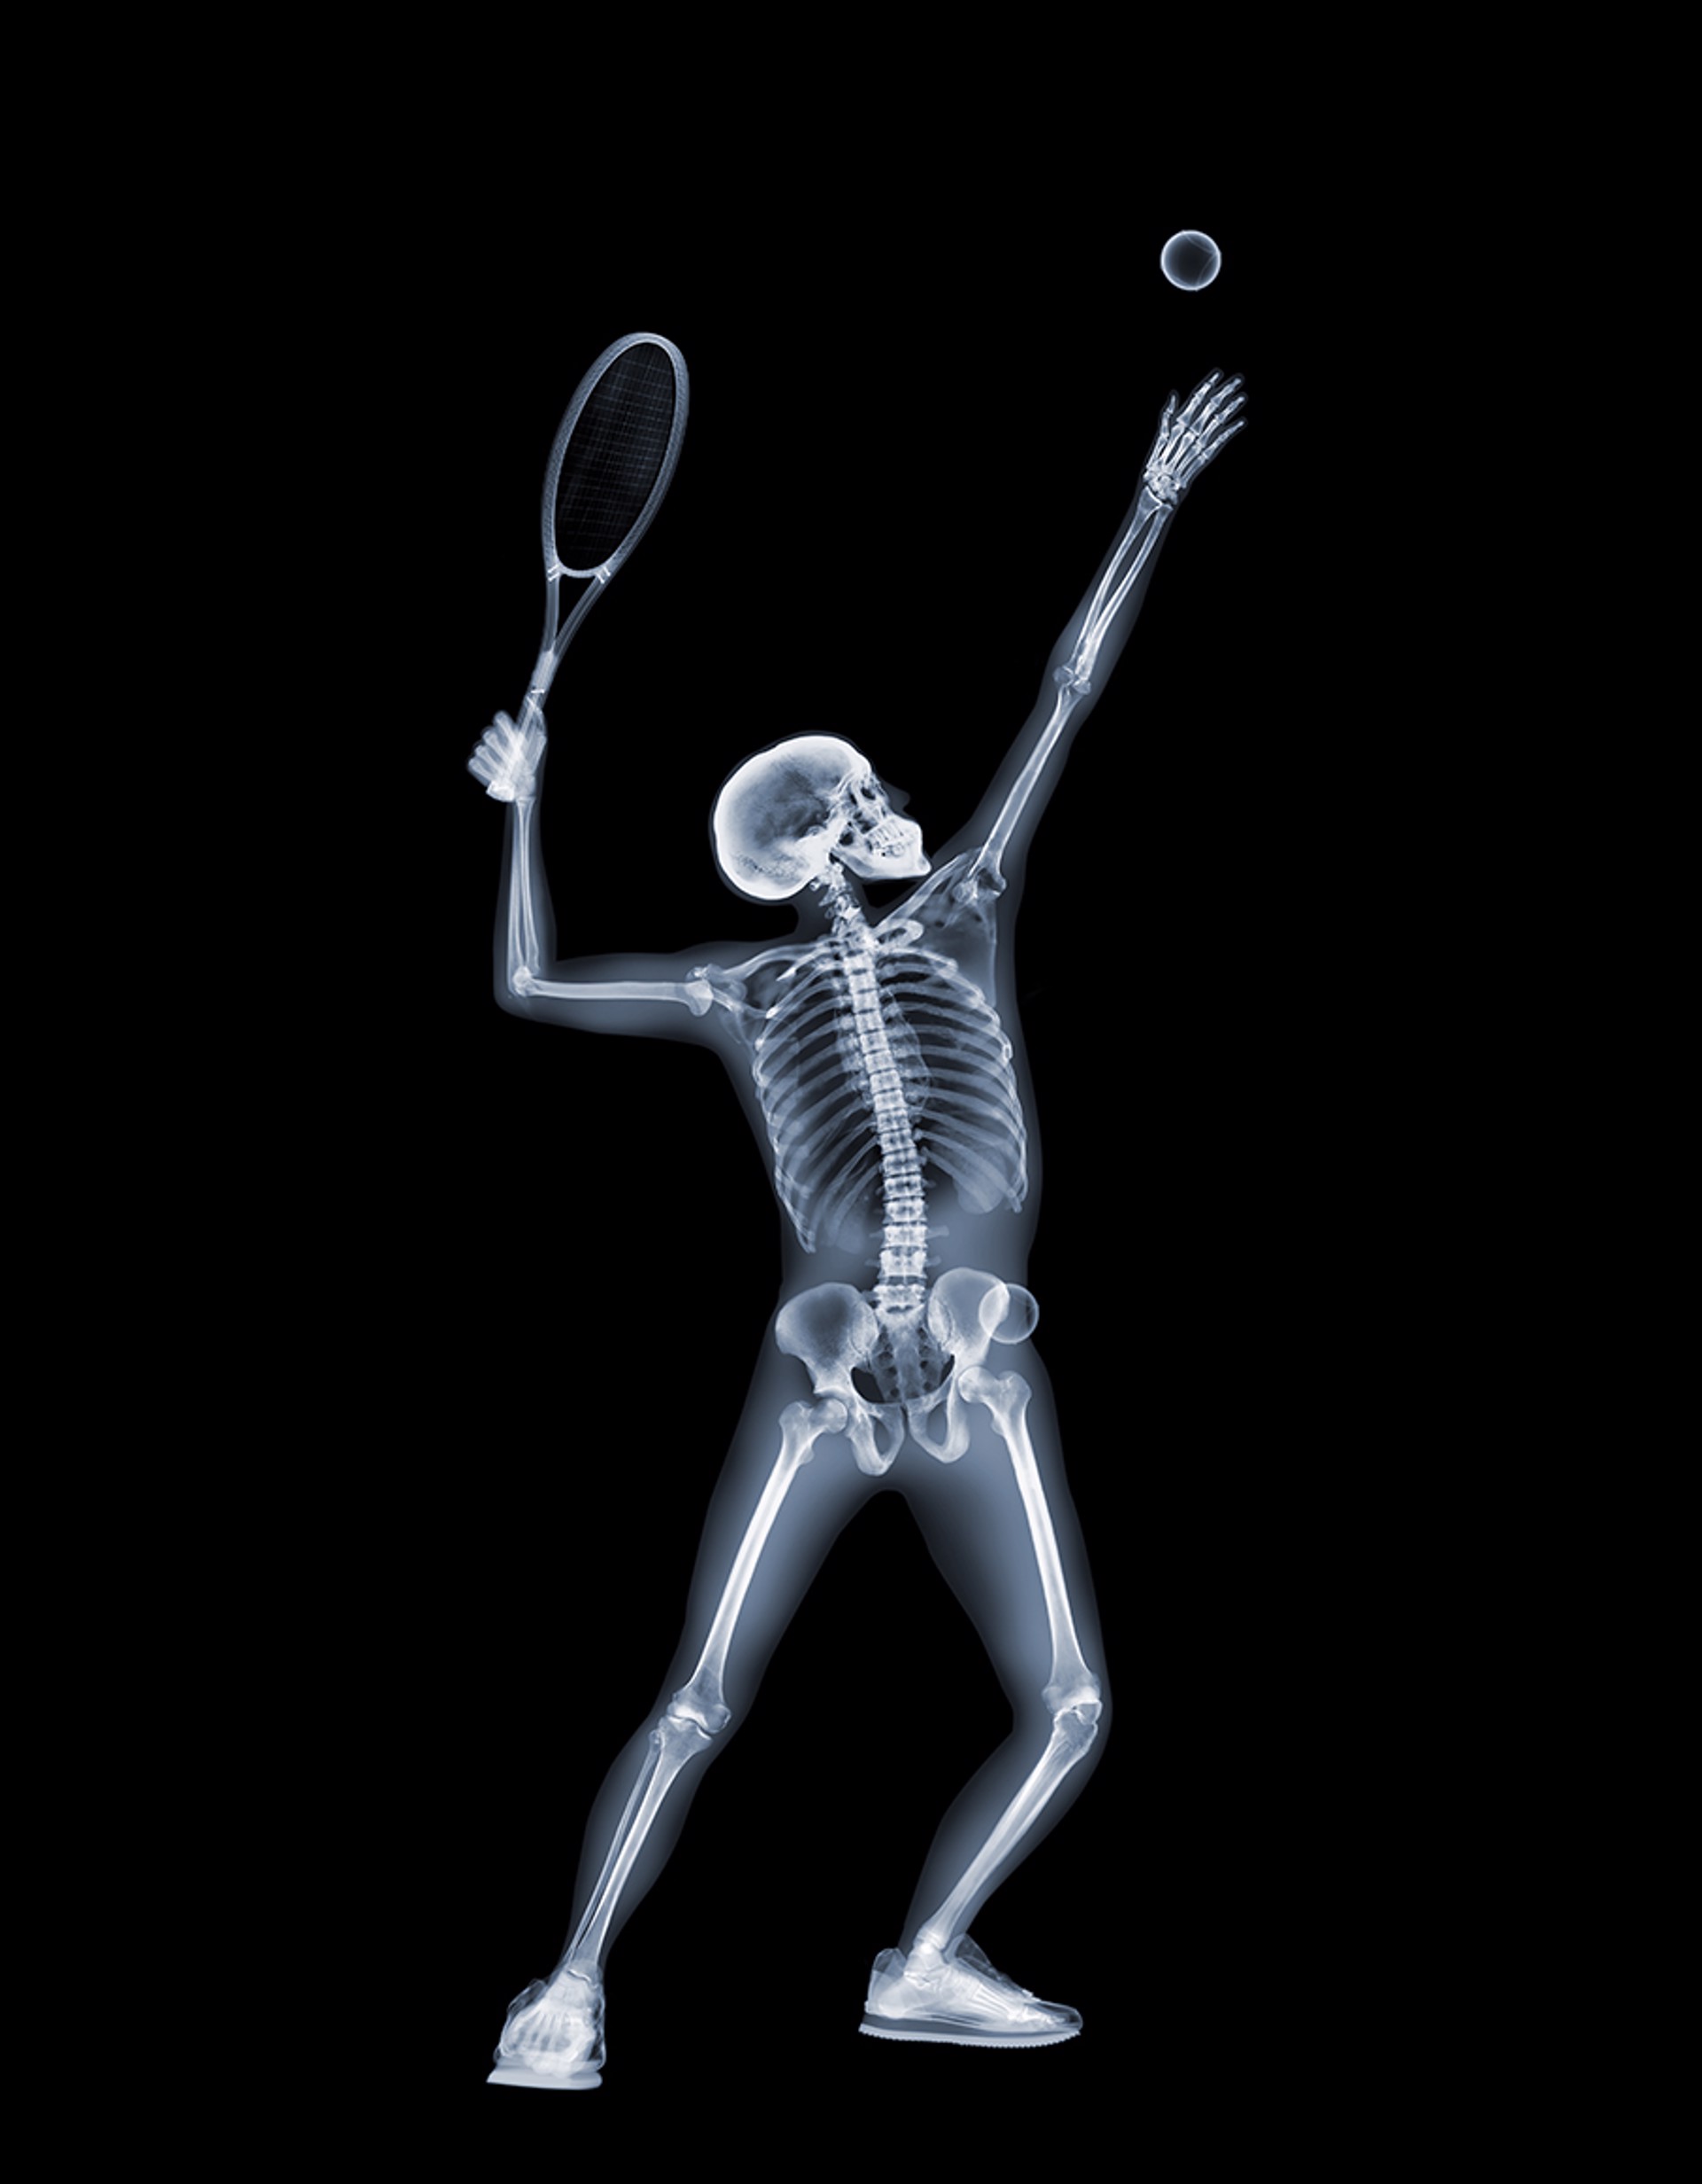 Tennis by Nick Veasey